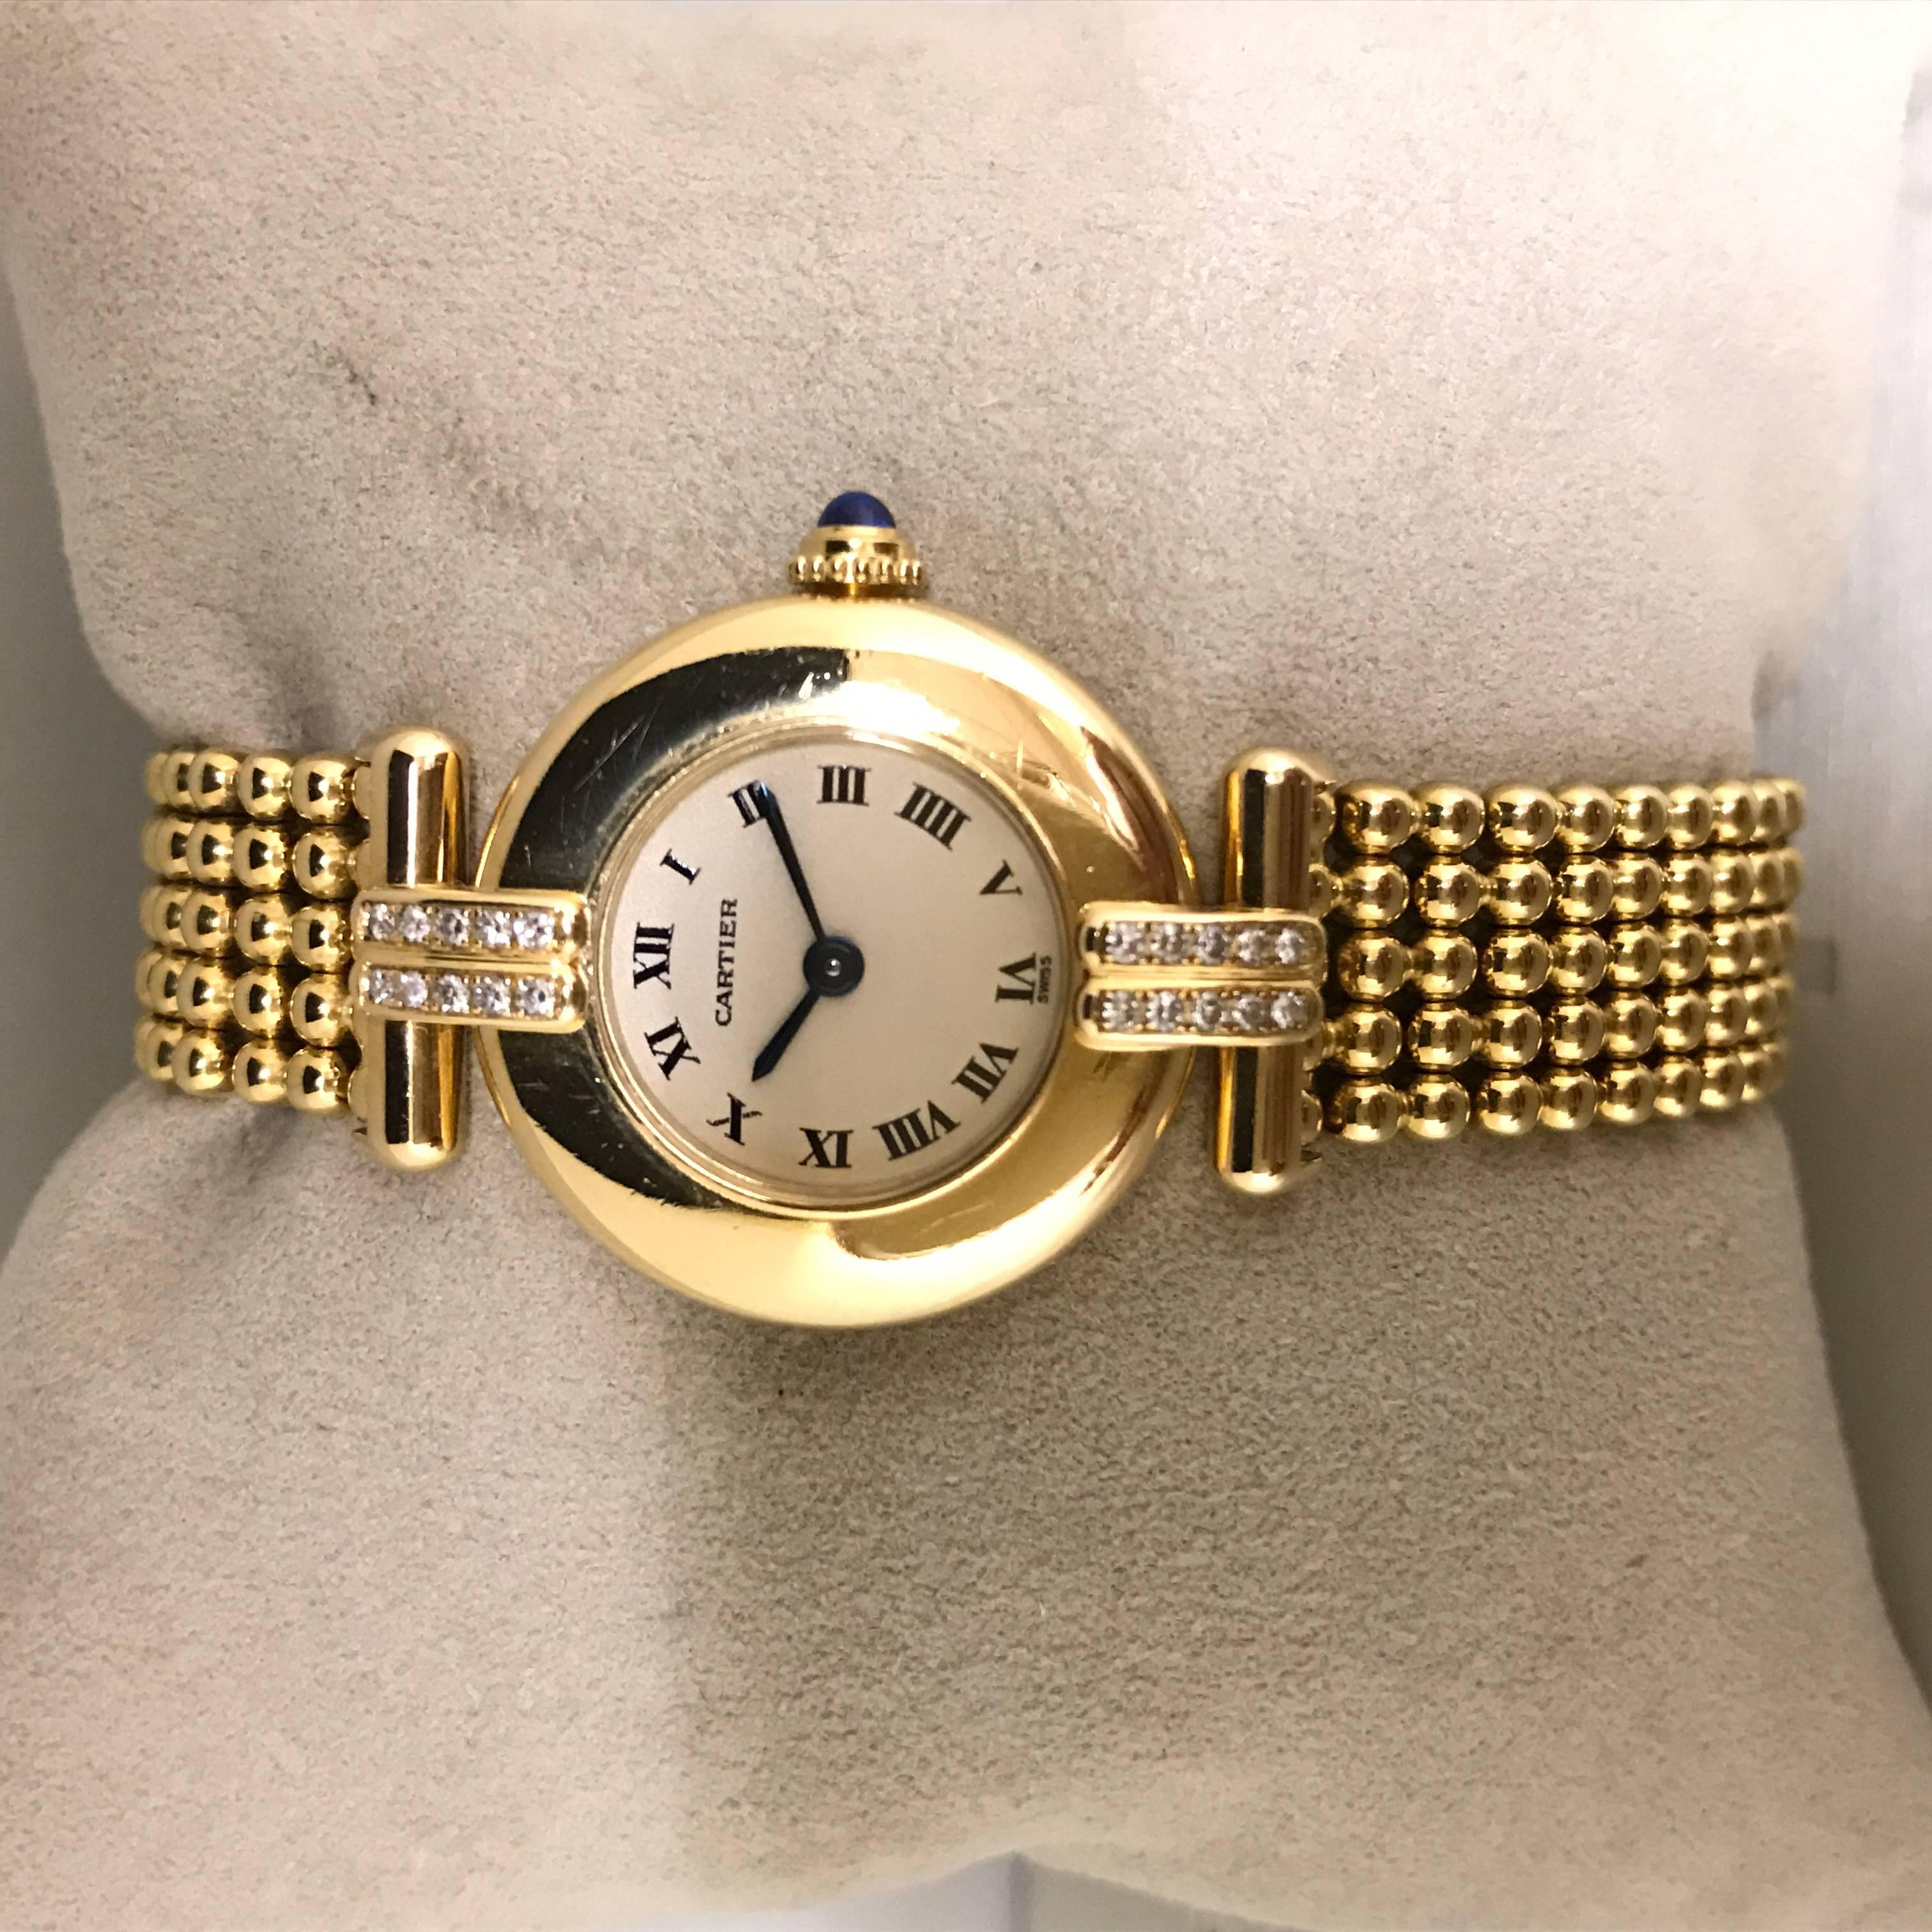 Discover this Cartier Yellow Gold Paving Diamonds Colisee Quartz Ladies Wristwatch.
Watch CARTIER COLISEE ,movement ref 1923 ,dial color creme ,index roman numerals..The fasteners are set with 20 diamonds.
articulated bracelet ,clasp gold signed